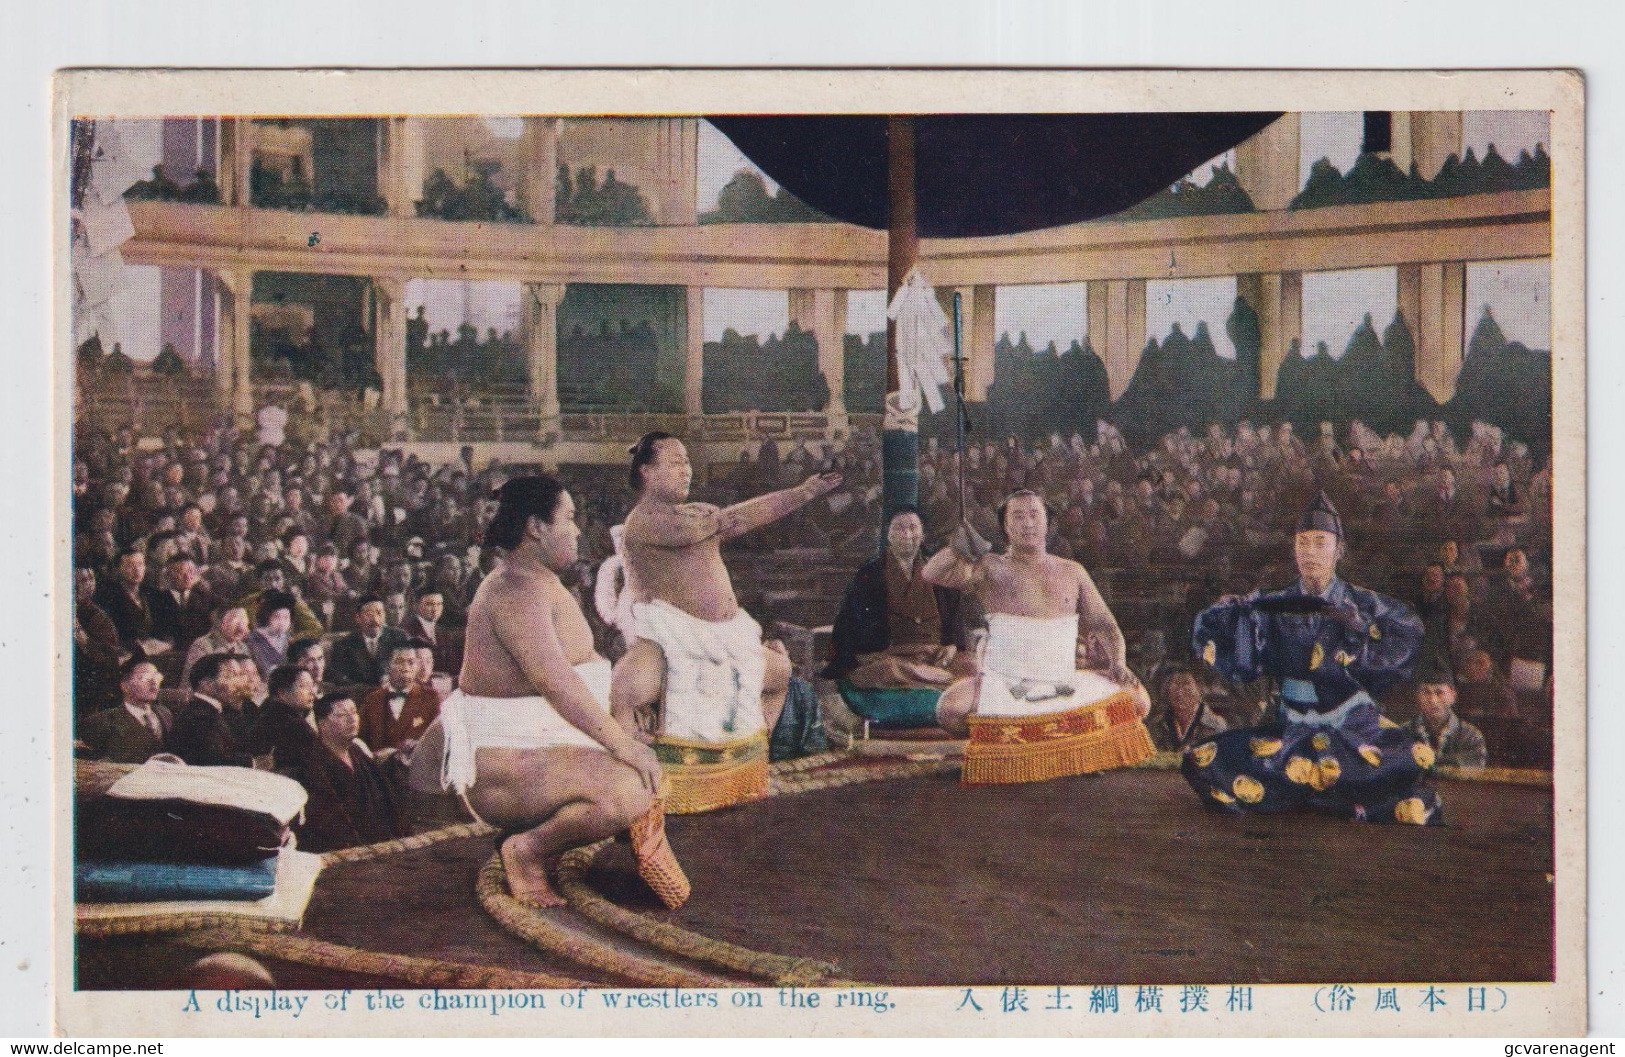 SUMO  YOKOZUMA   1912  A DISPLAY OF THE CHAMPION OF WRESLERS ON THE RING - Martial